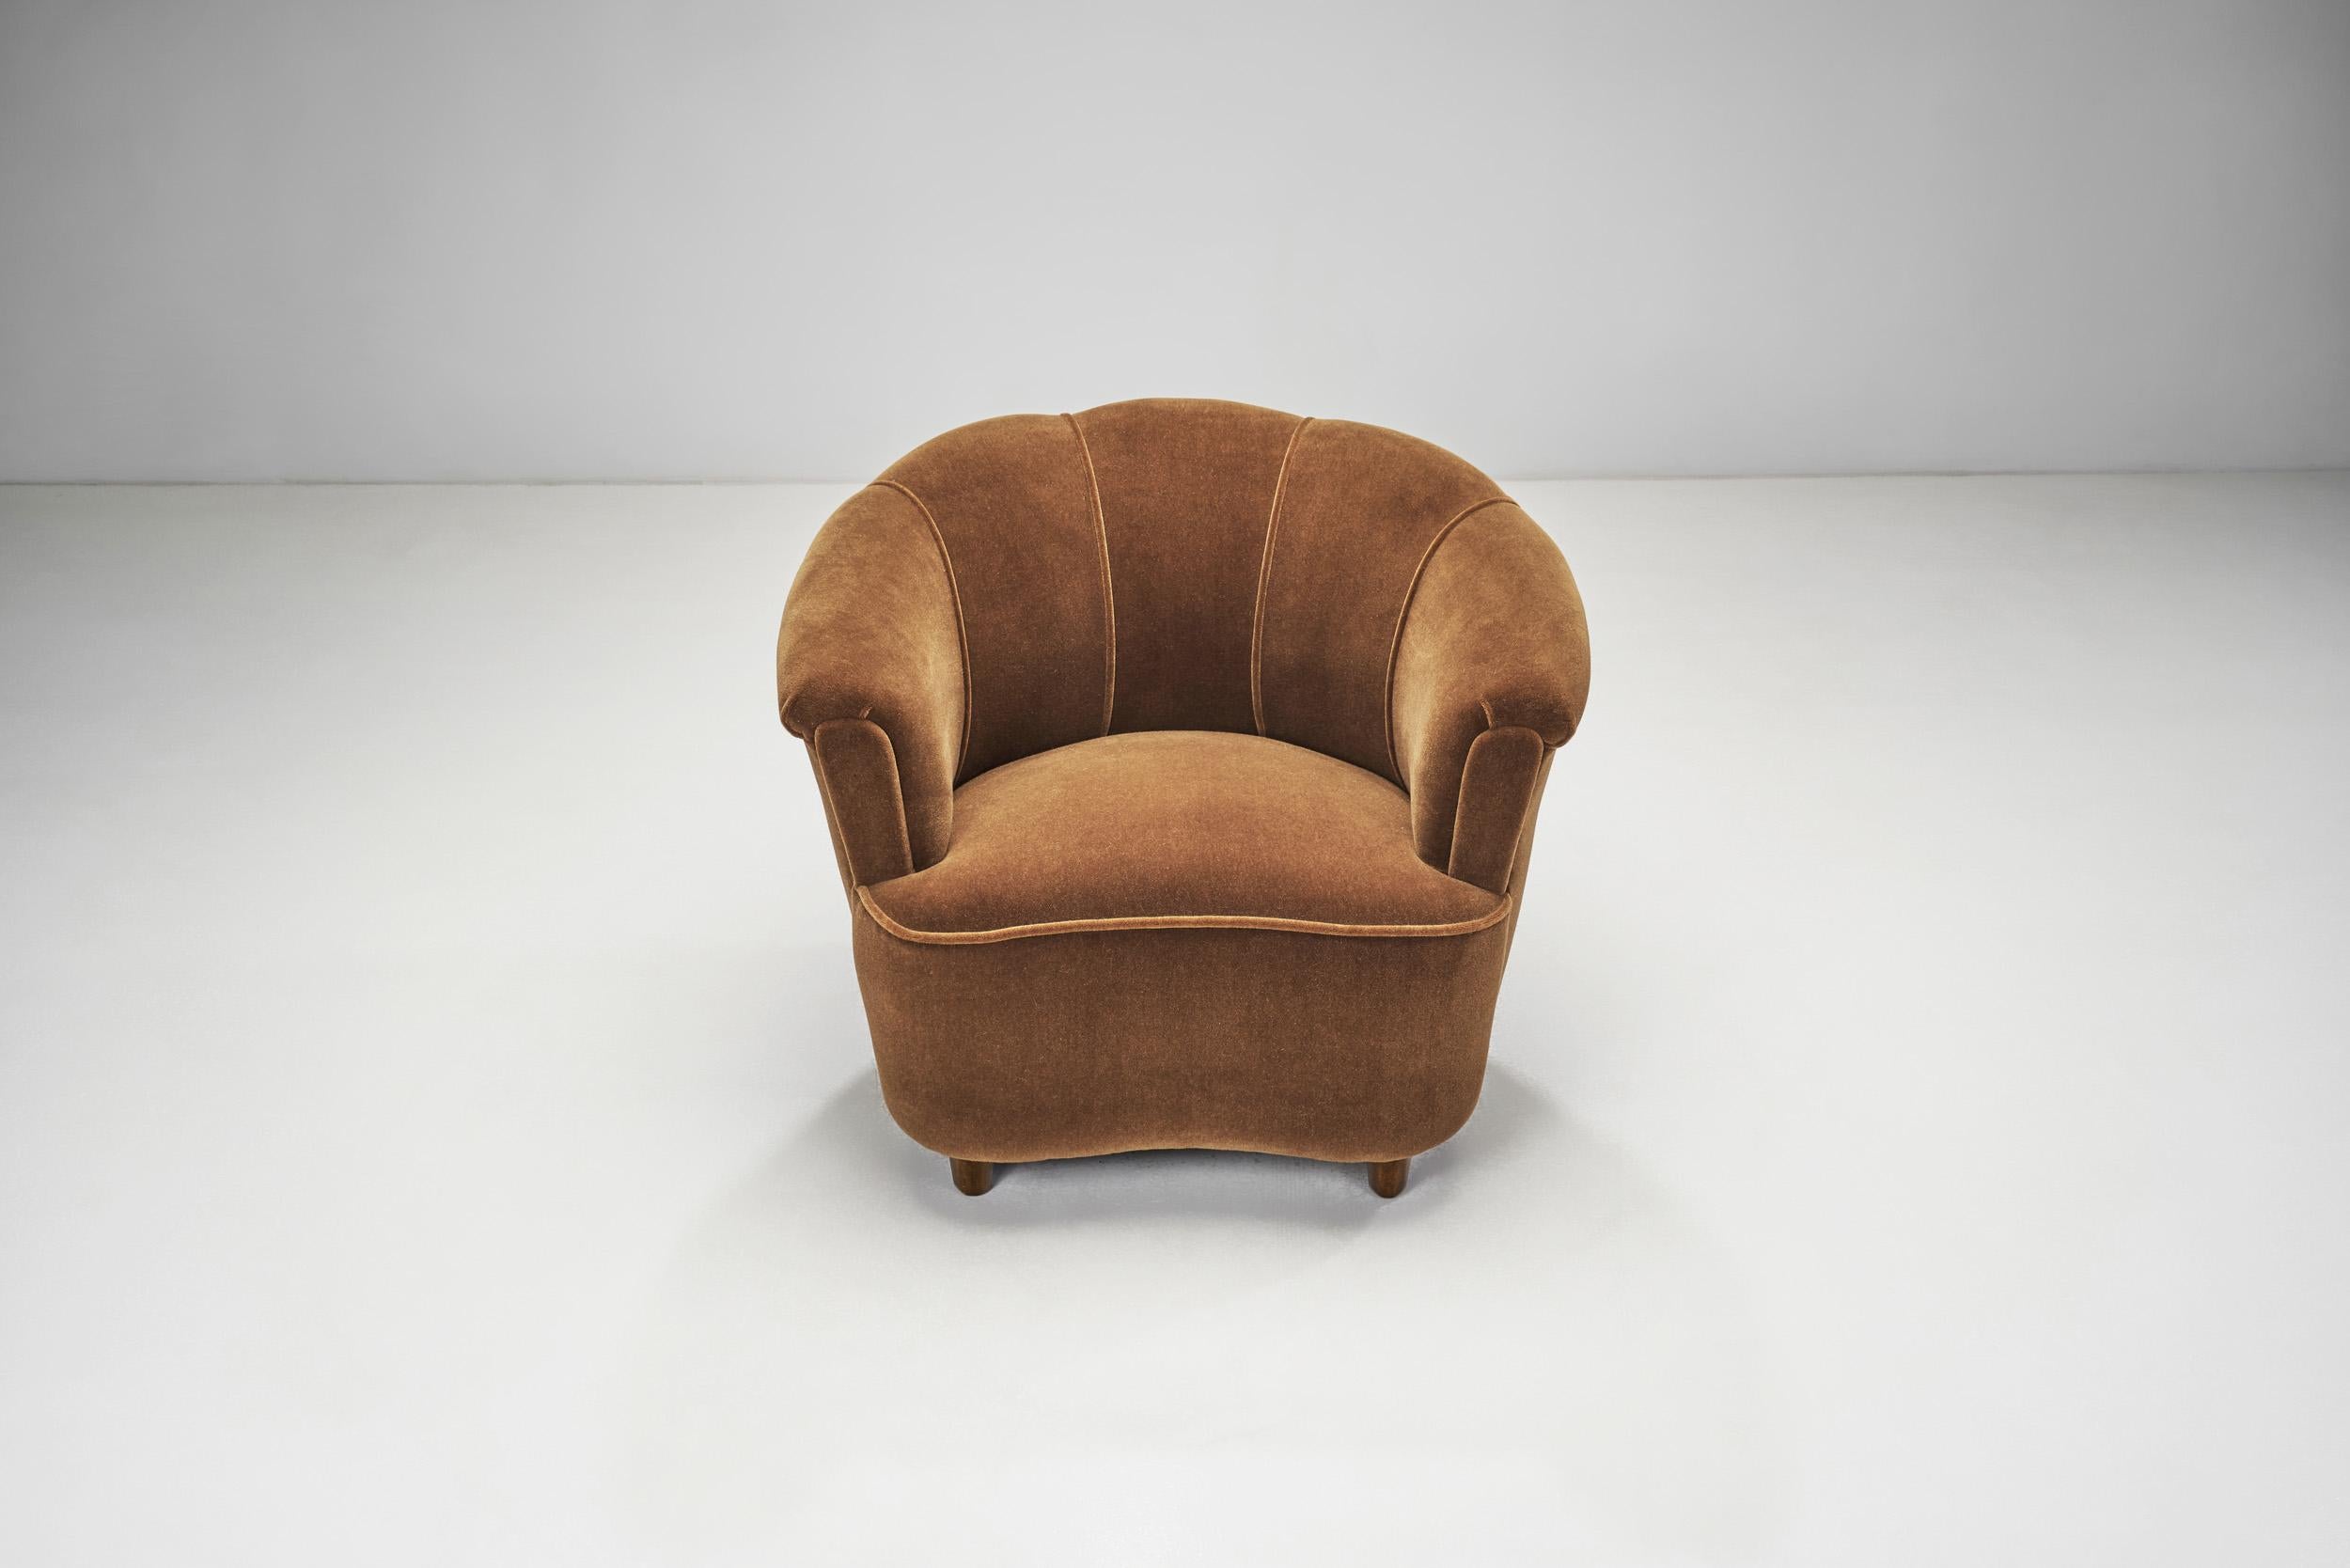 Fabric Swedish Upholstered Lounge Chairs, Sweden, 1940s